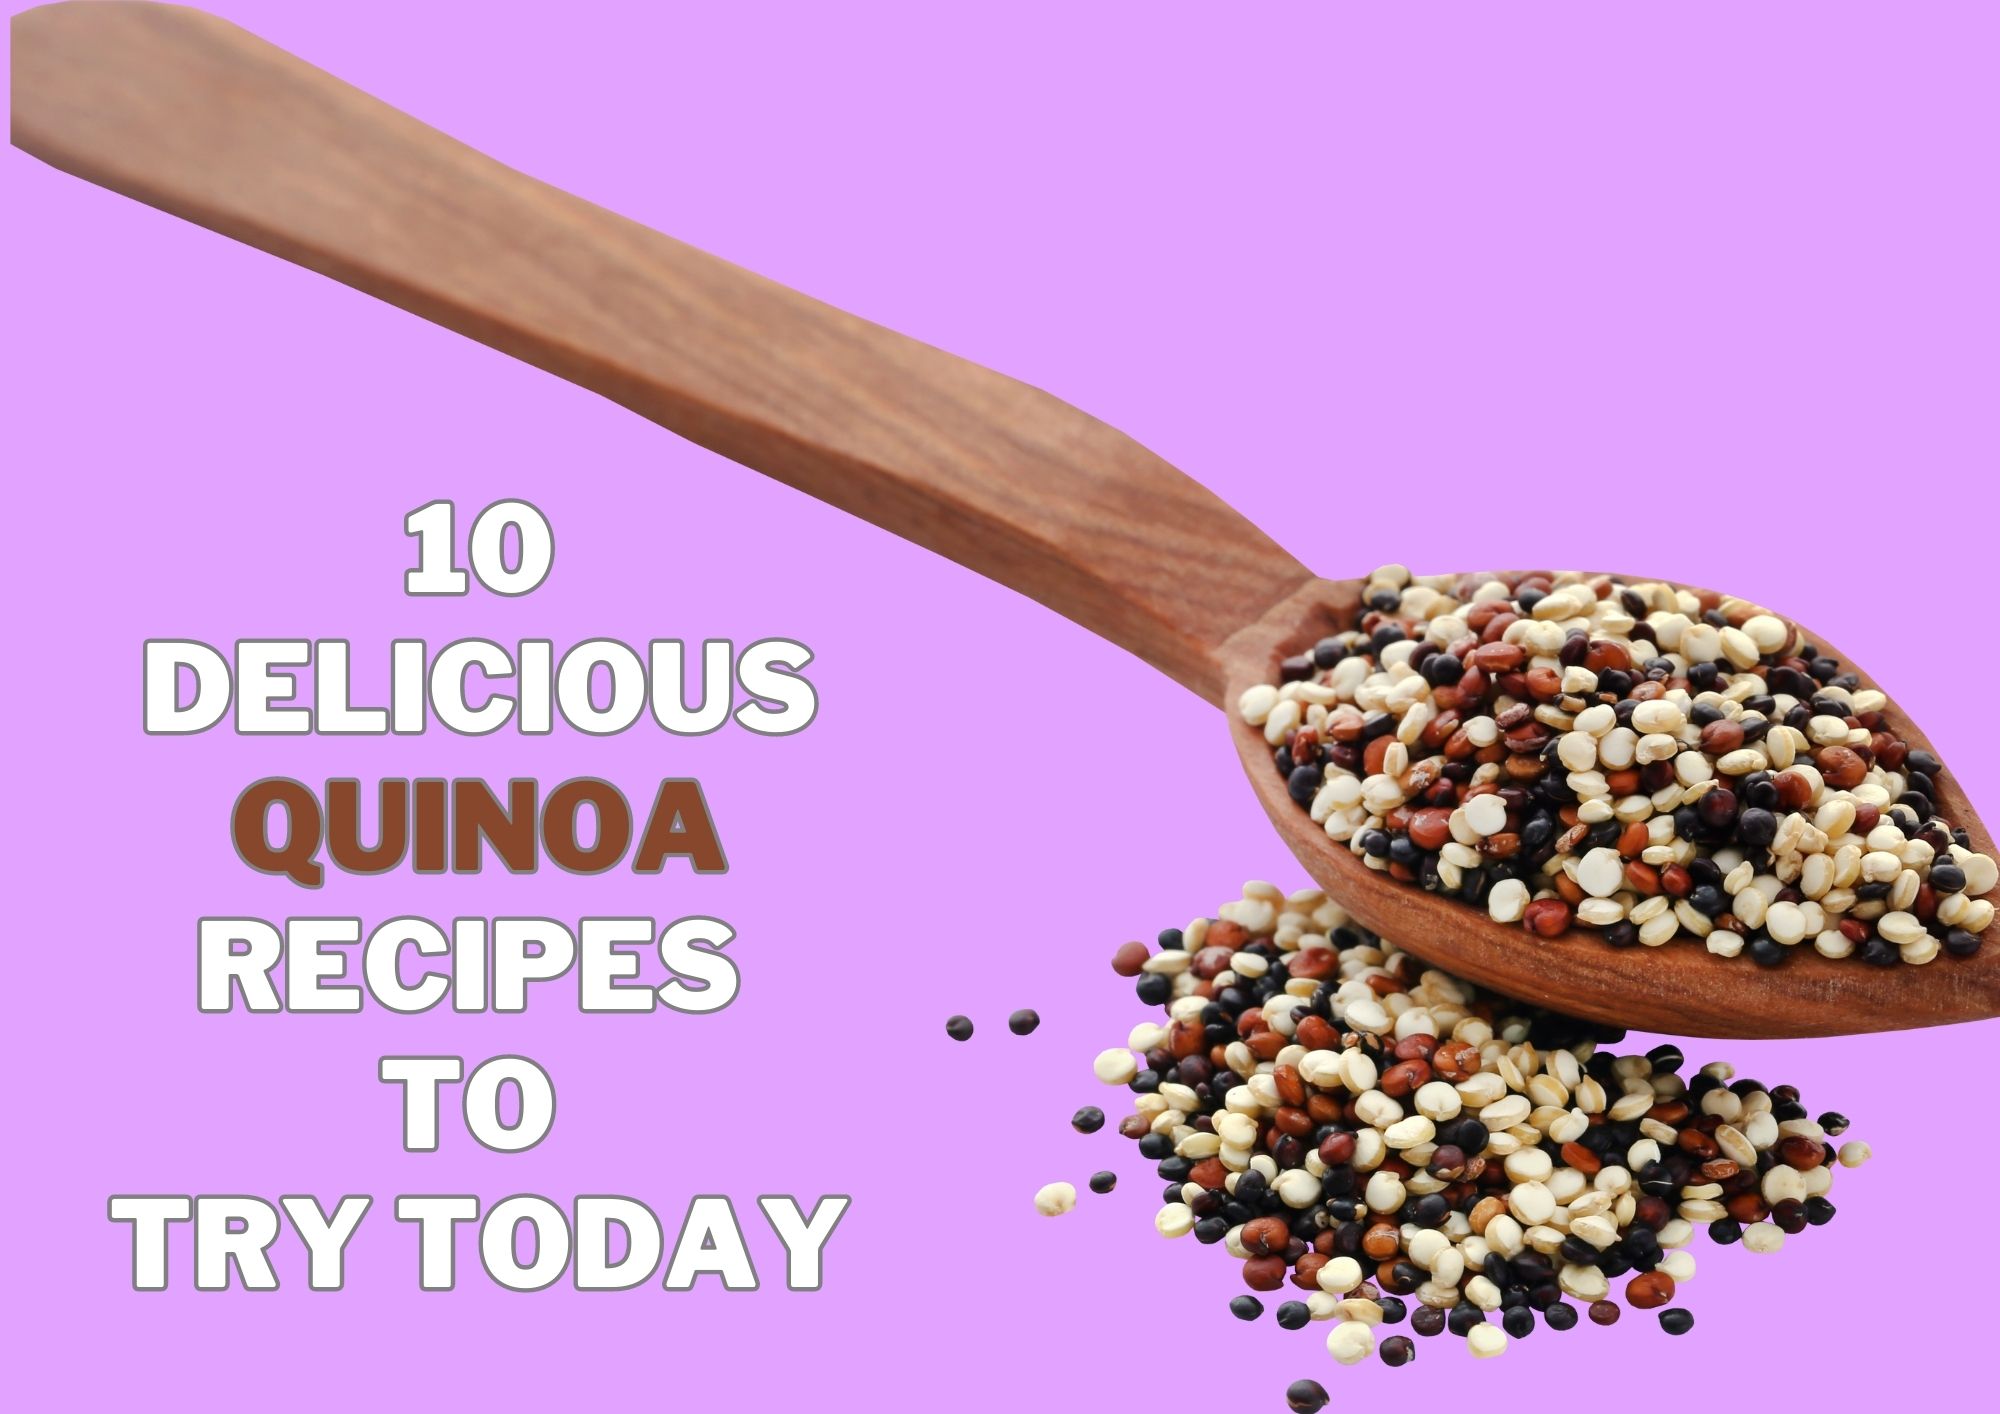 10 Delicious Quinoa Recipes to Try Today